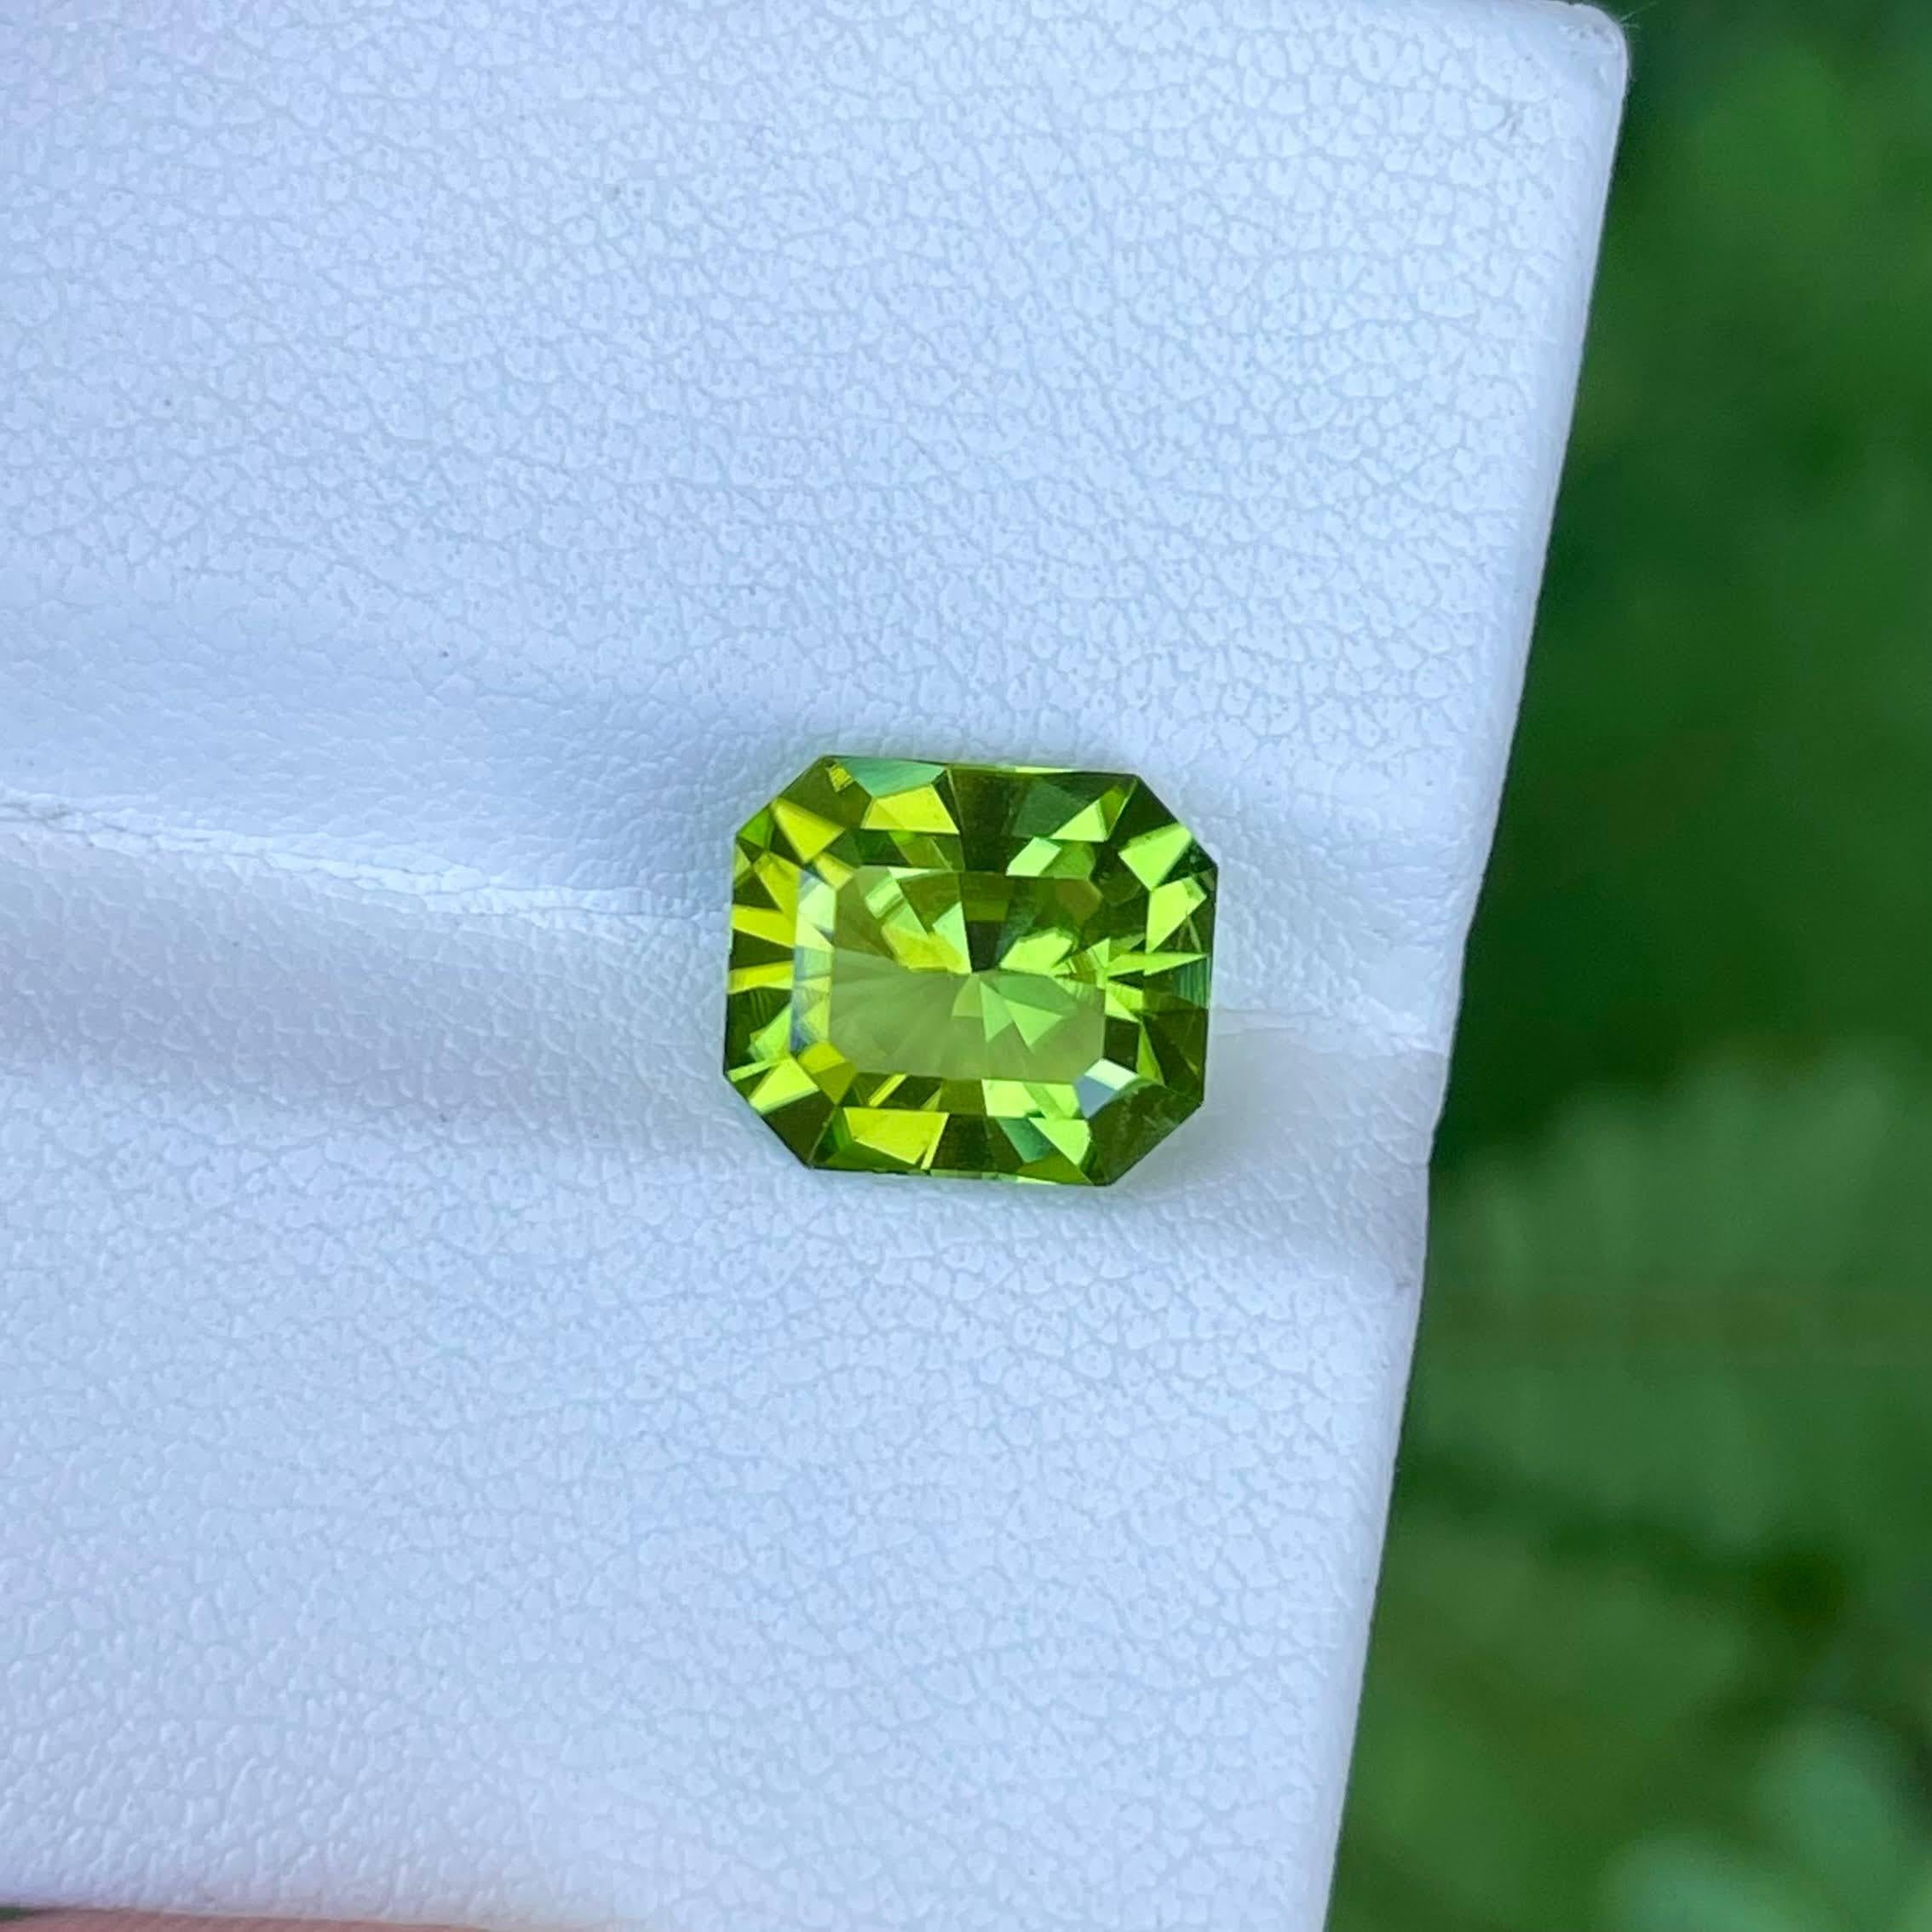 Weight : 3.35 carats 
Dimensions: 9.4x8.1x5.5 mm
Clarity: Eye Clean
Origin: Pakistan
Treatment: None
Shape: Octagonal
Cut: Radiant Cut




The Apple Green Peridot Stone, a radiant embodiment of elegance and sophistication, weighs a substantial 3.35